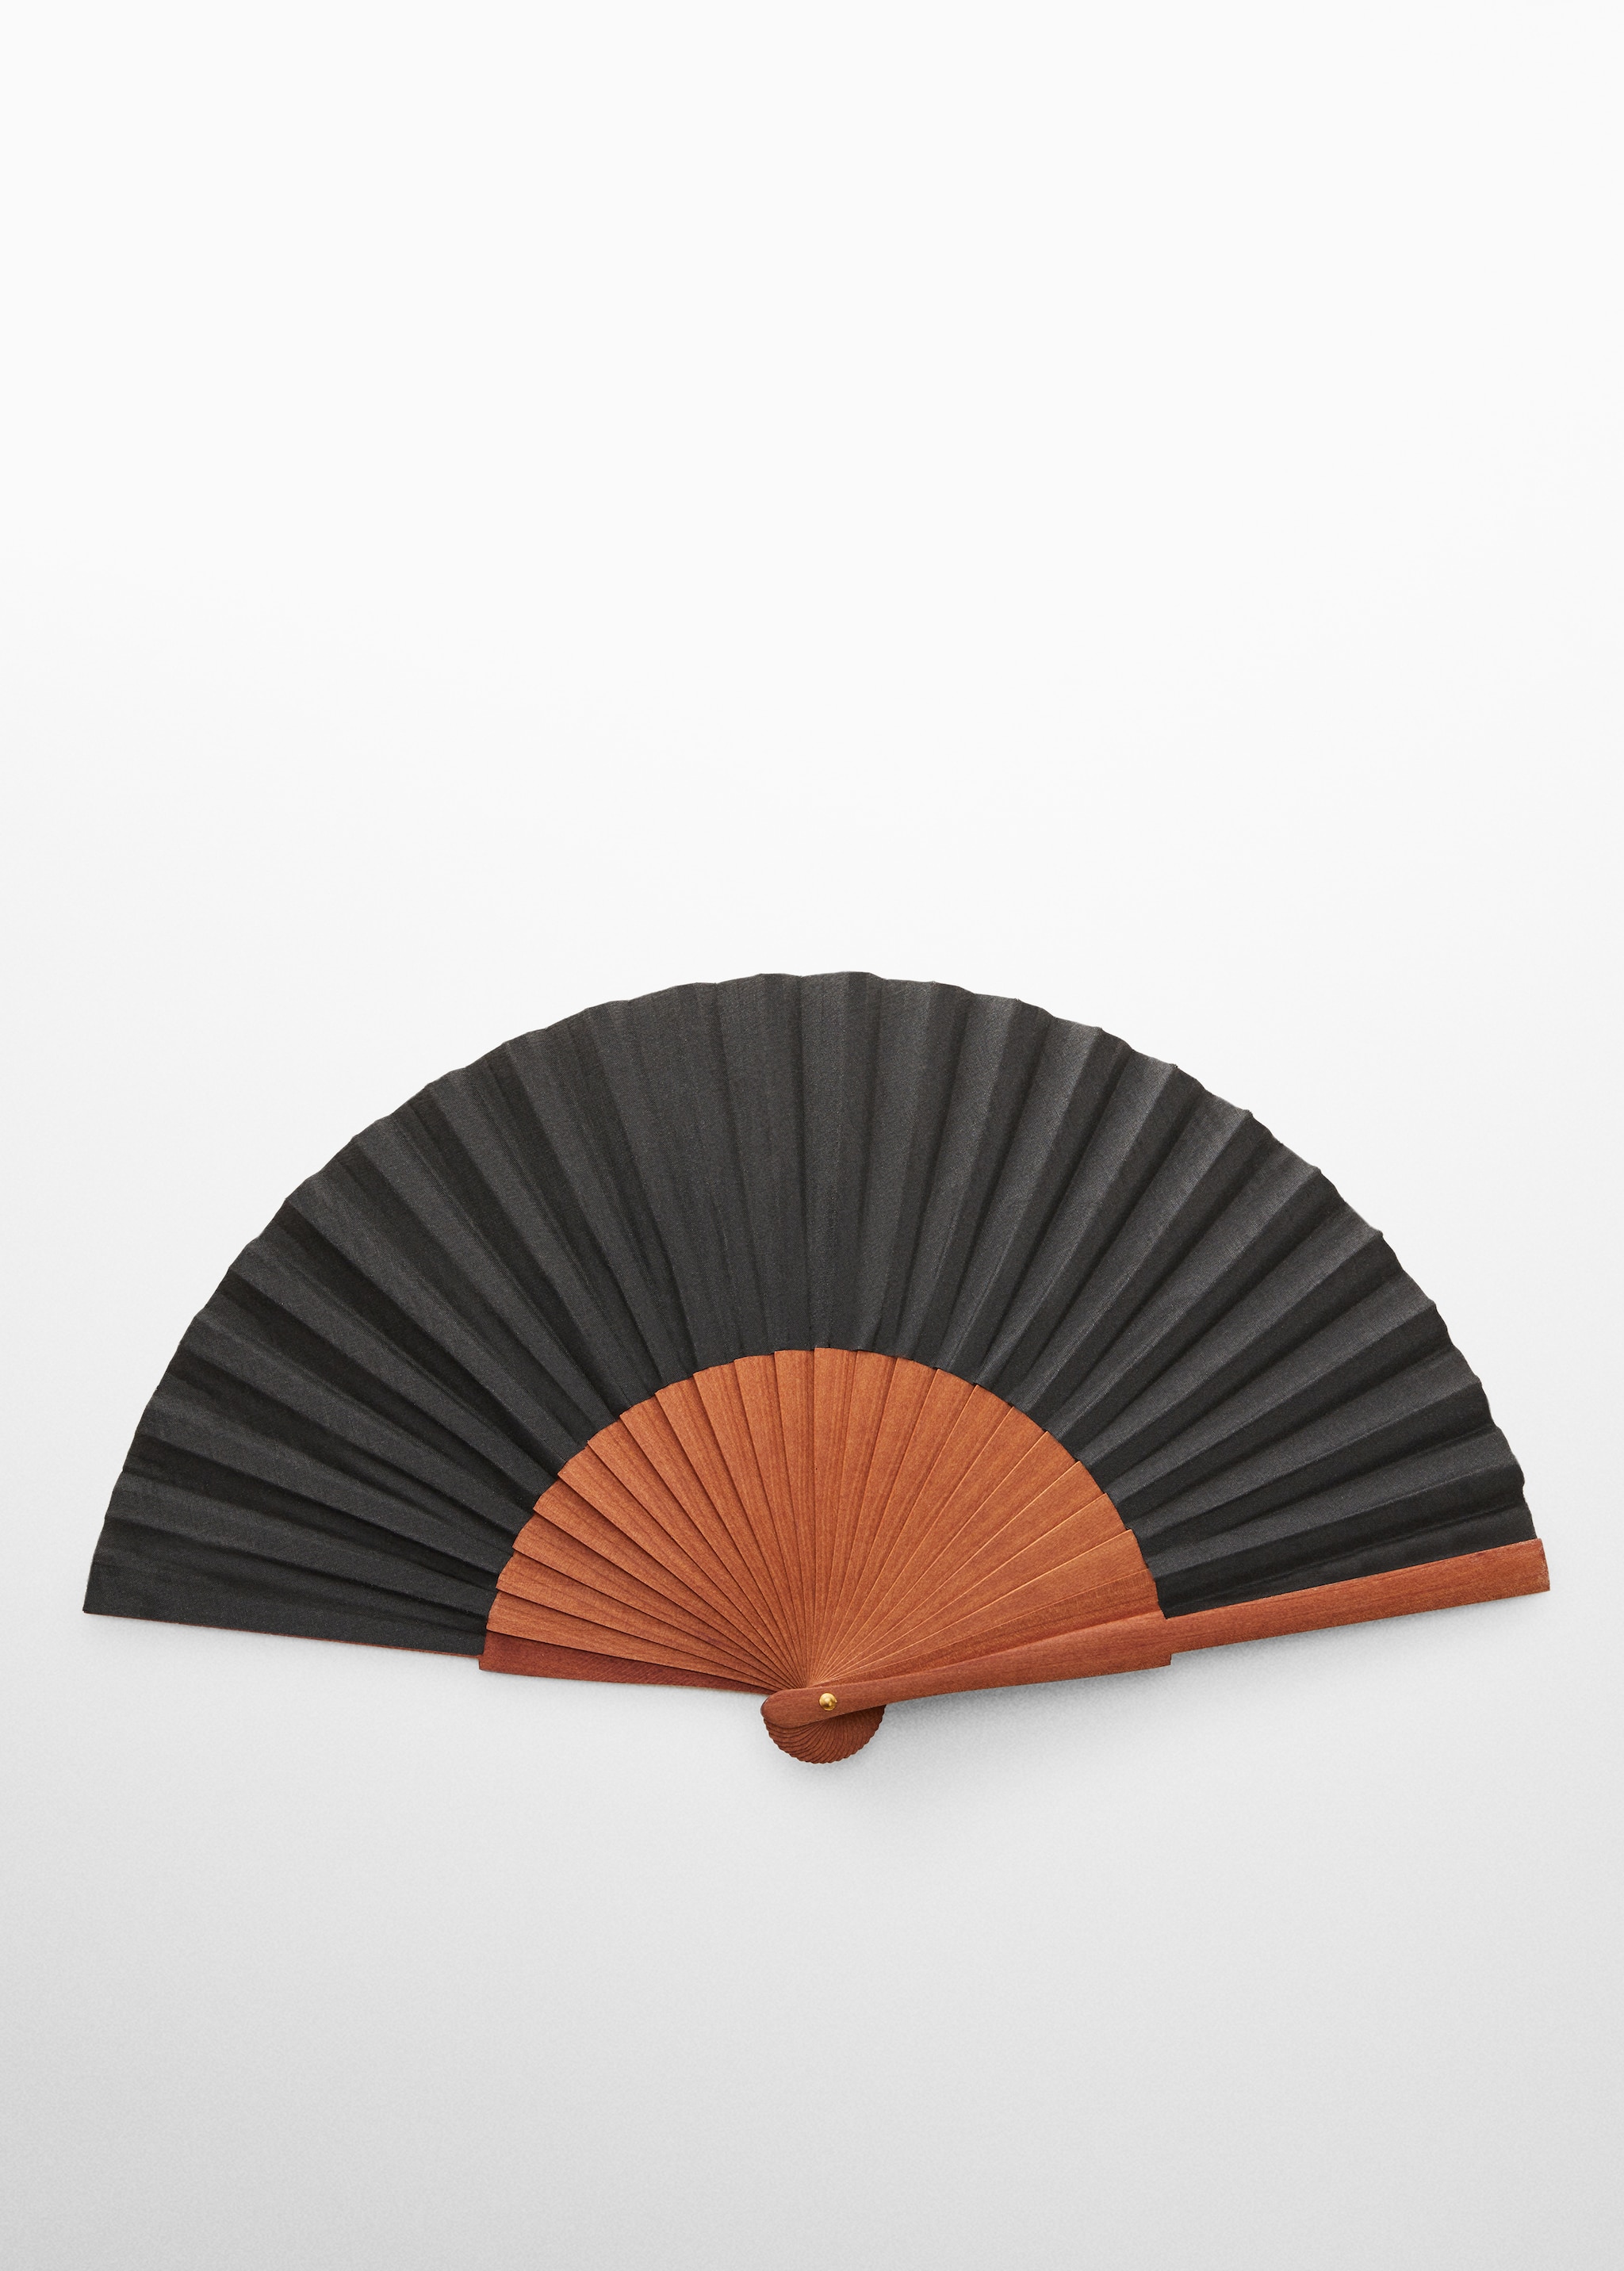 Wooden fan - Article without model